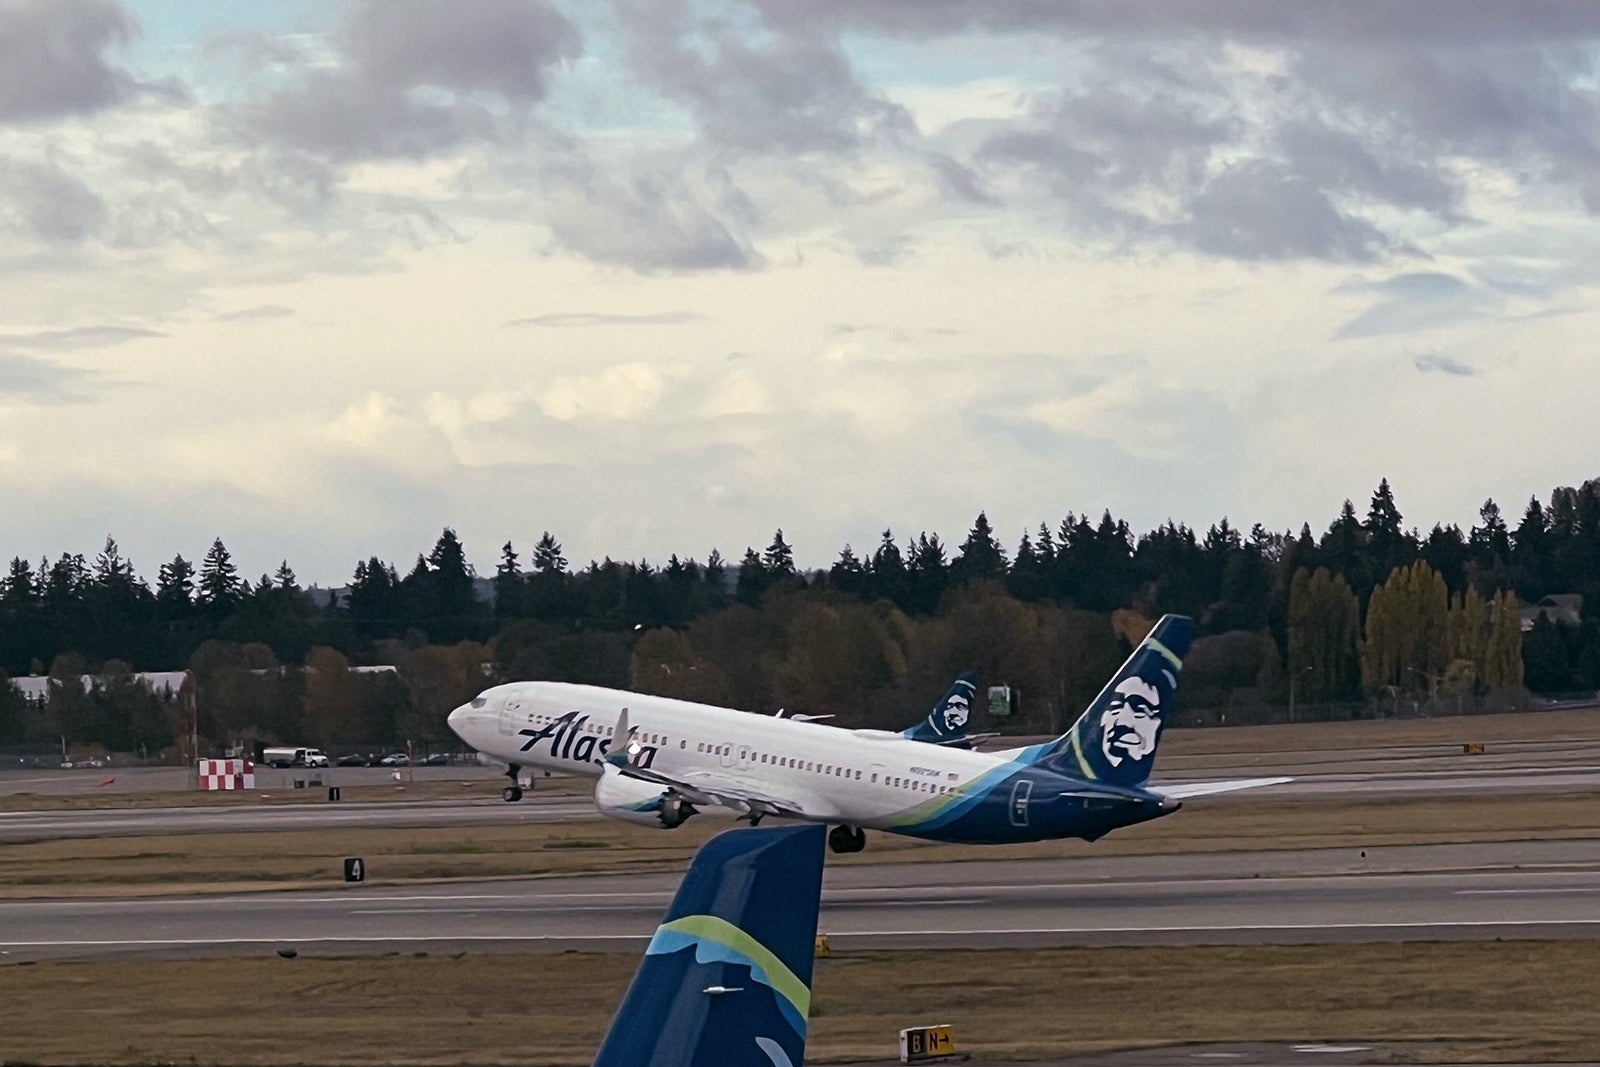 Alaska Airlines credit card gets additional perks, new restrictions — and a higher annual fee - The Points Guy